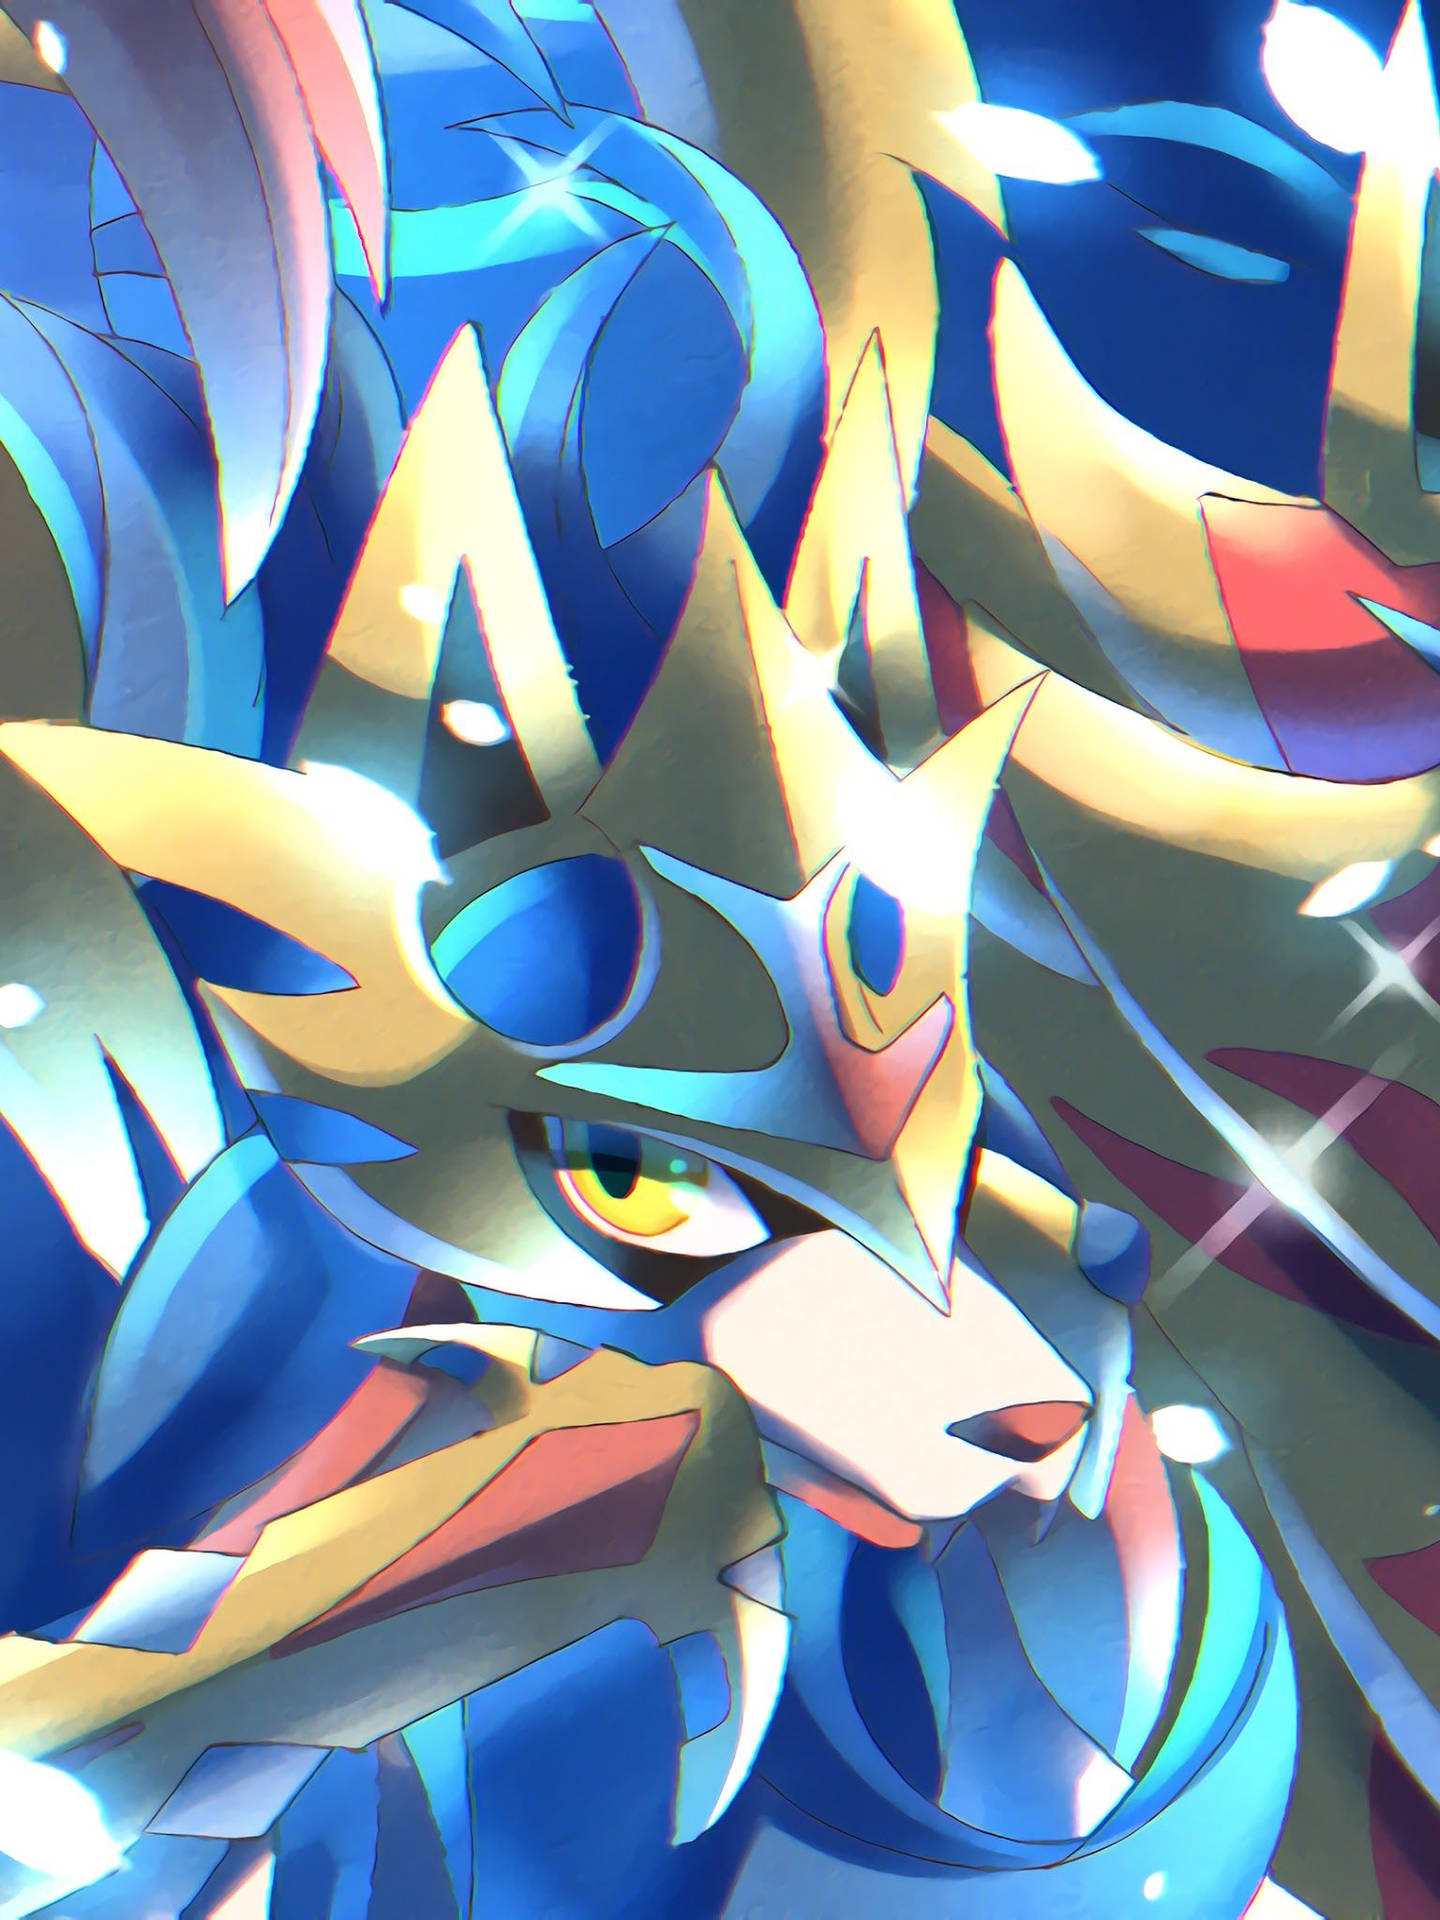 "Take your adventure to a new level with the legendary Pokémon, Zacian, in Pokémon Sword and Shield!" Wallpaper